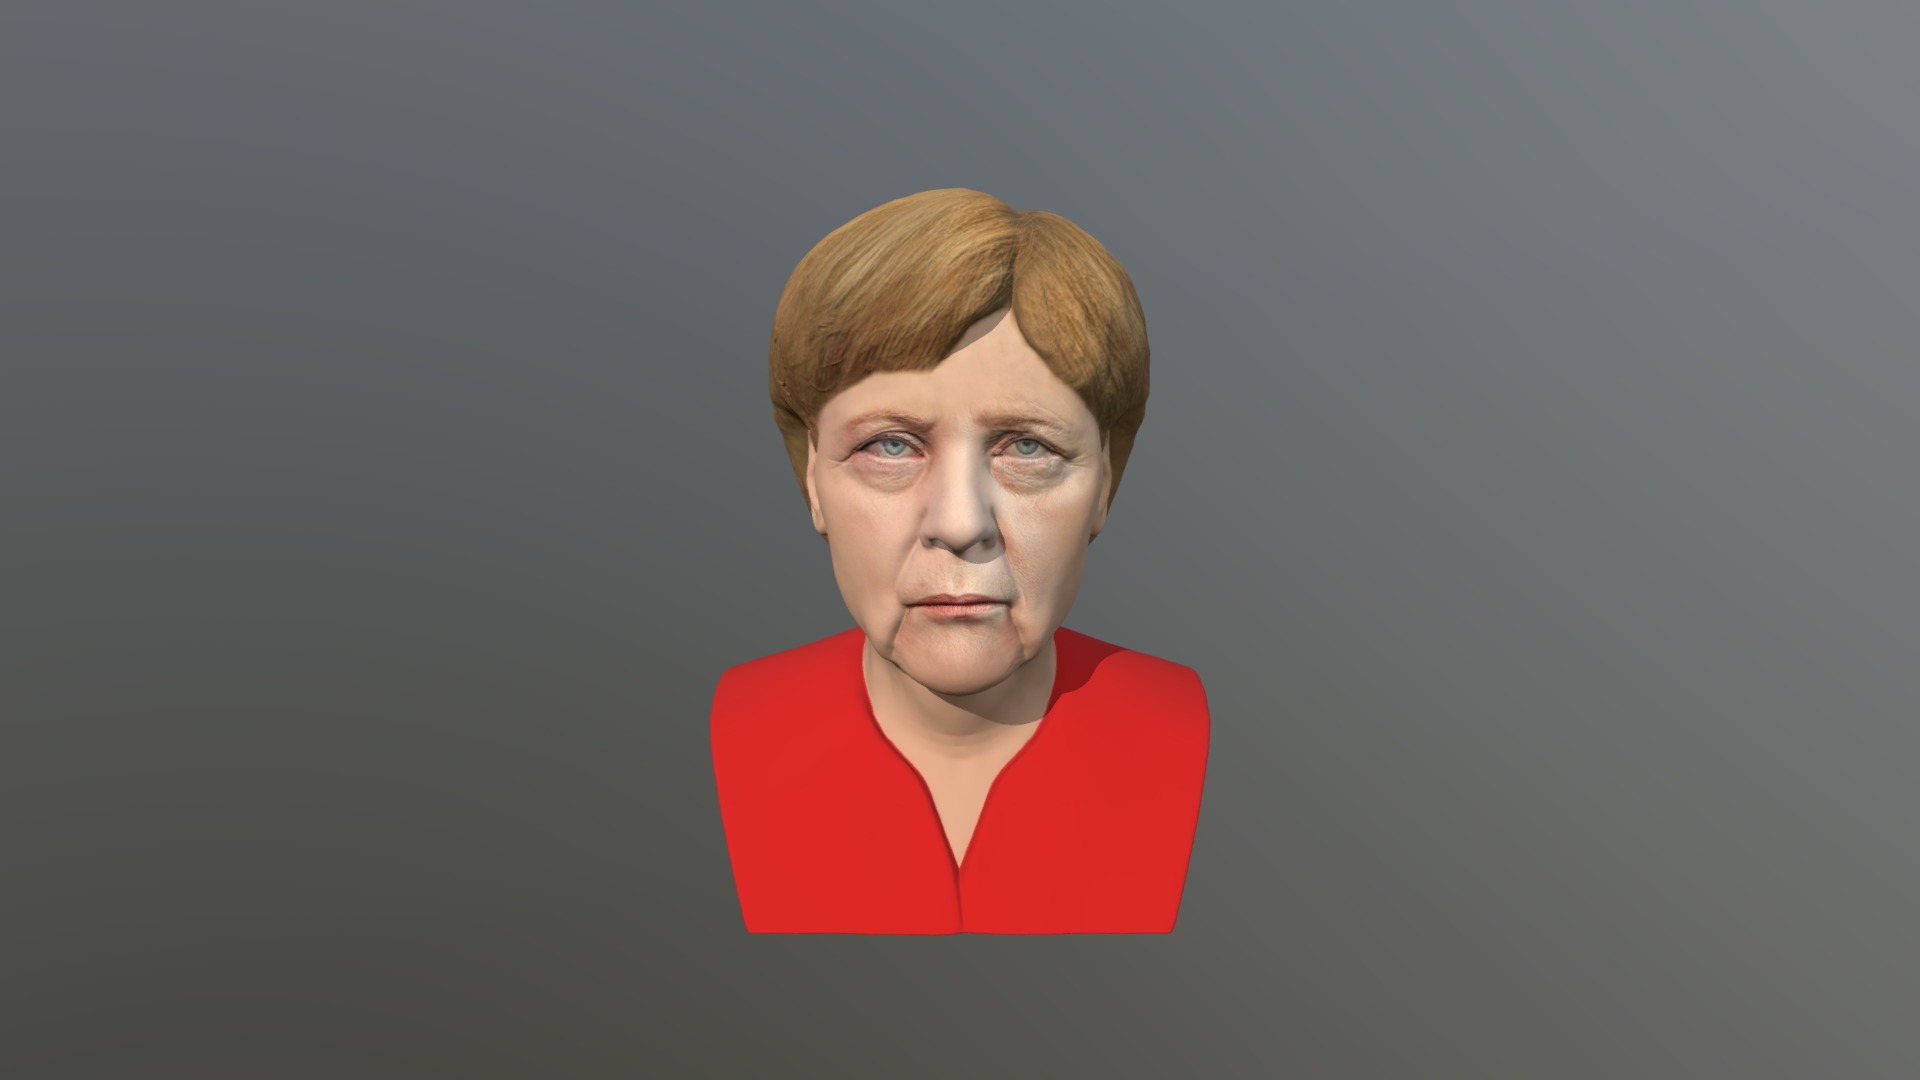 3D model Angela Merkel bust ready full color 3D printing - This is a 3D model of the Angela Merkel bust ready full color 3D printing. The 3D model is about a man in a red shirt.